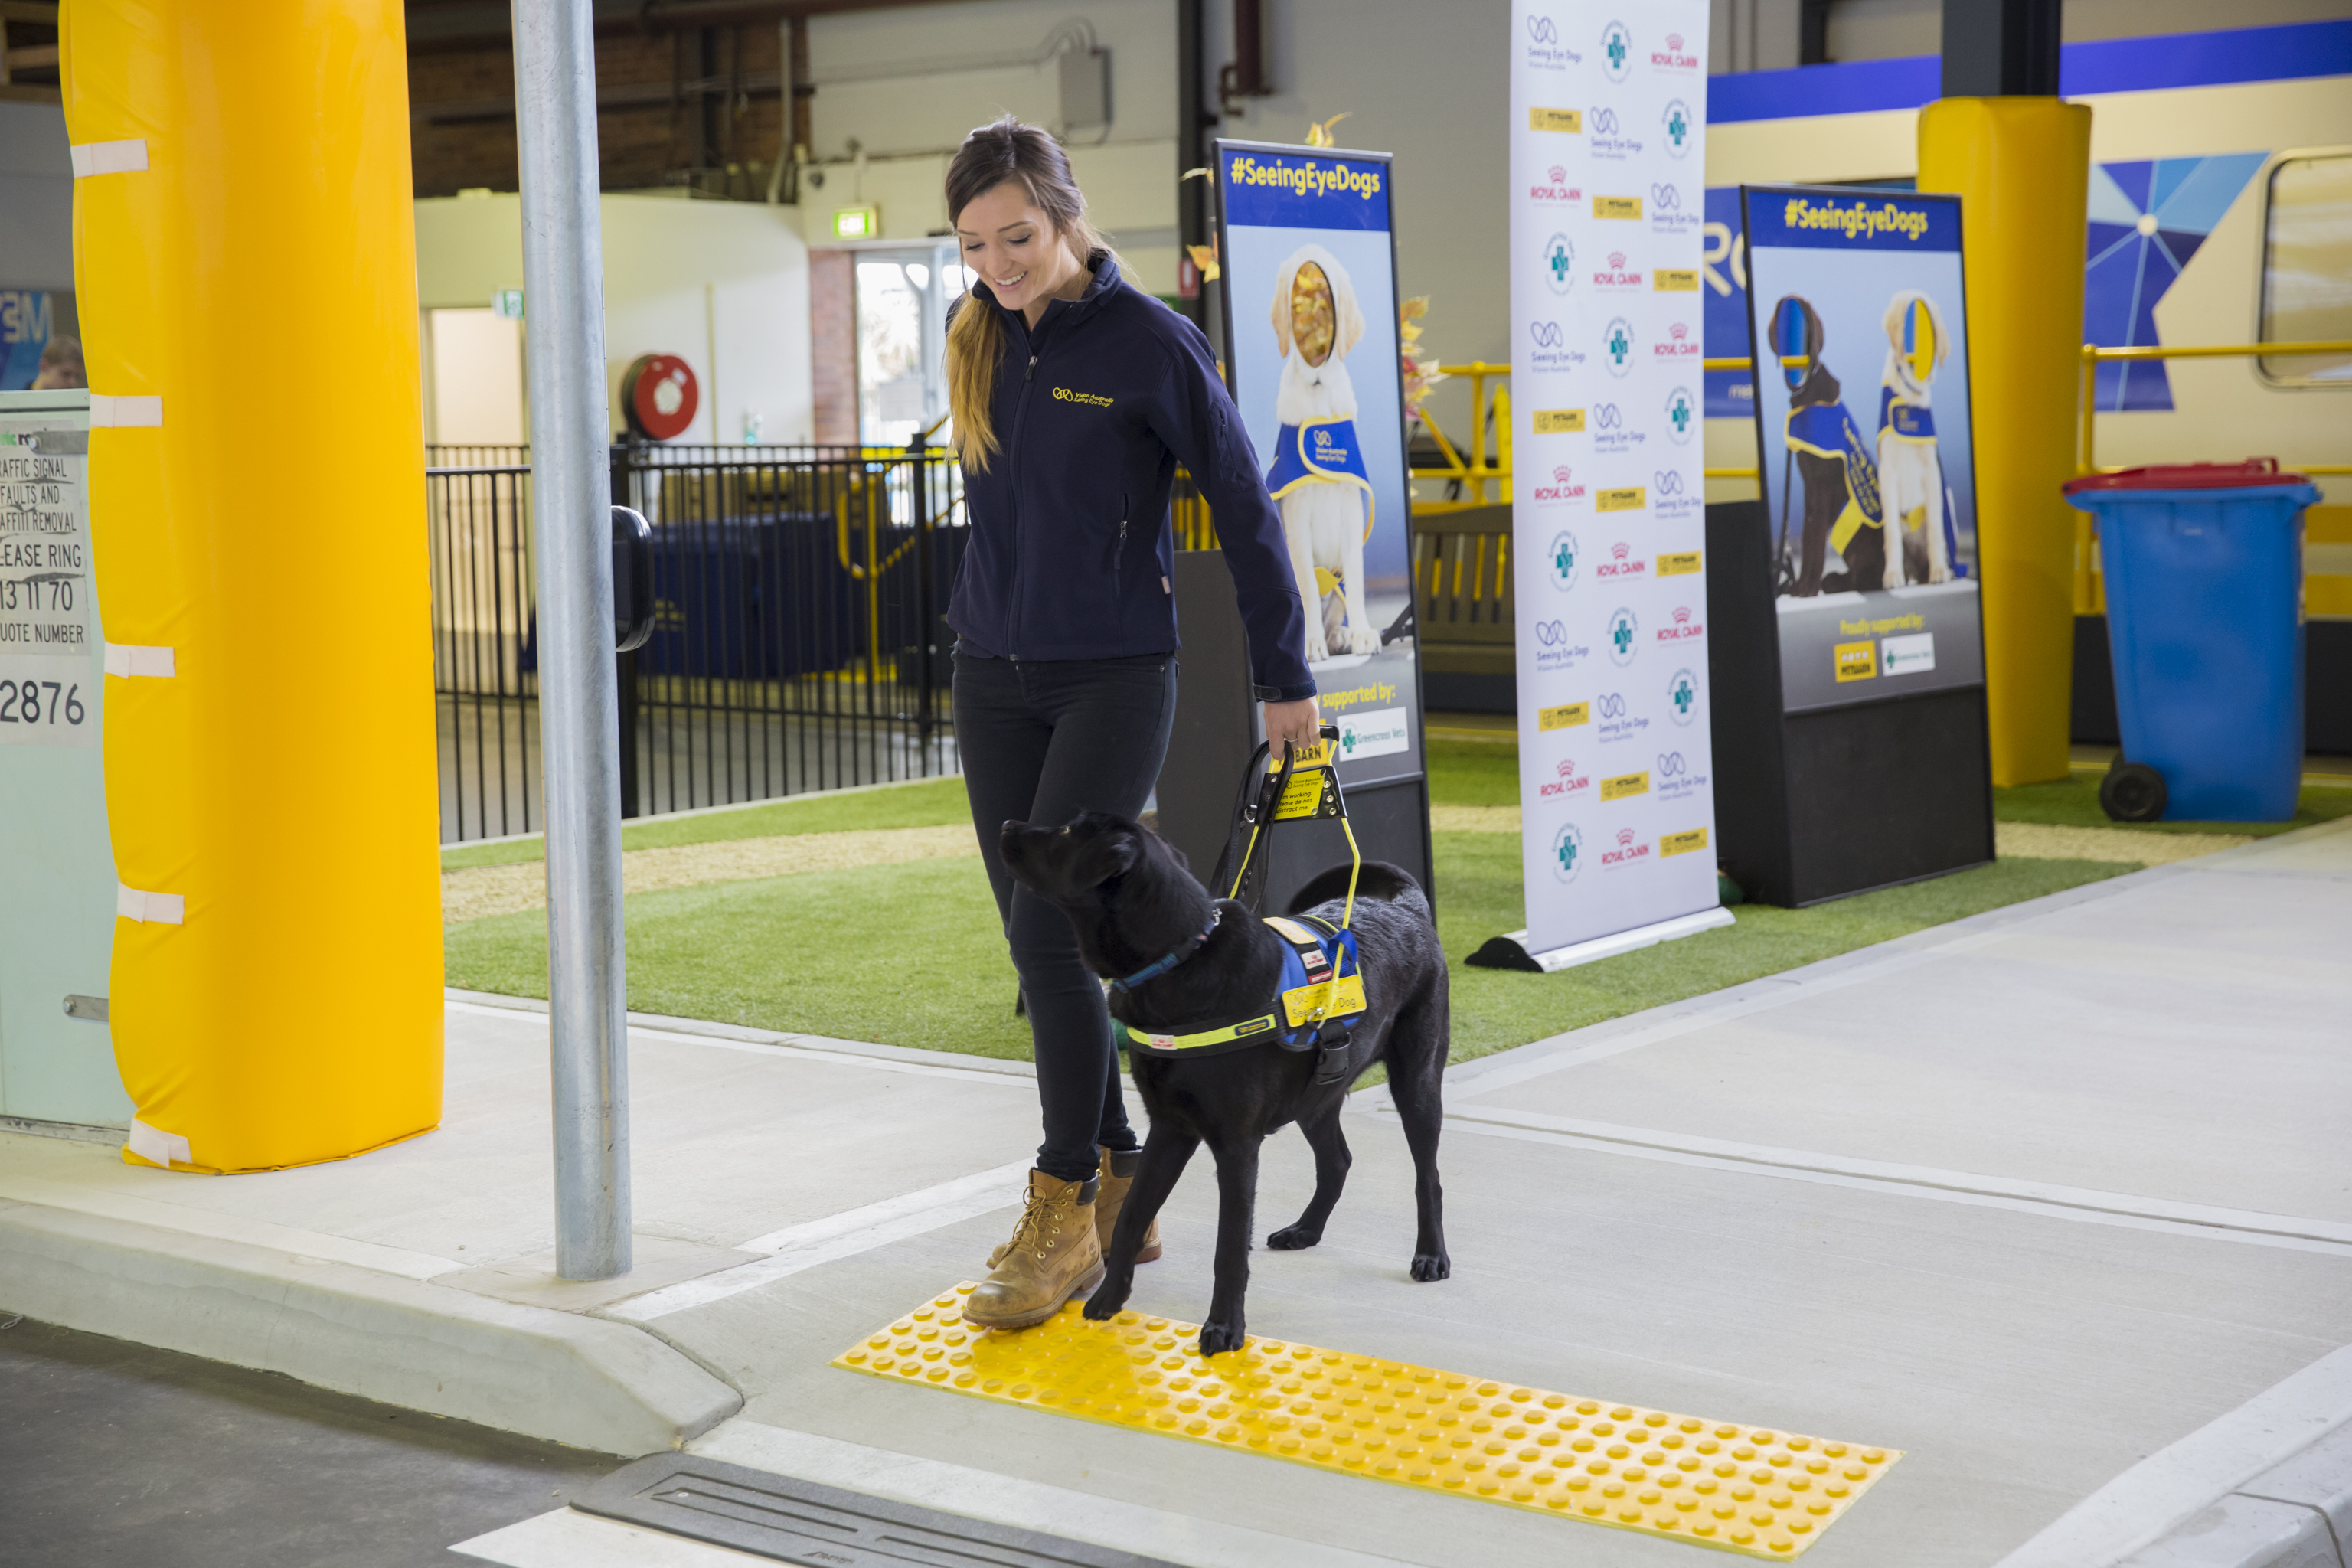 "Seeing Eye Dog Trainee Instructor Carly Gregorich provides a training demonstration with SED Falcon in the world-class Mobility Training Centre. SED Falcon and Carly stopped next to a traffic light."